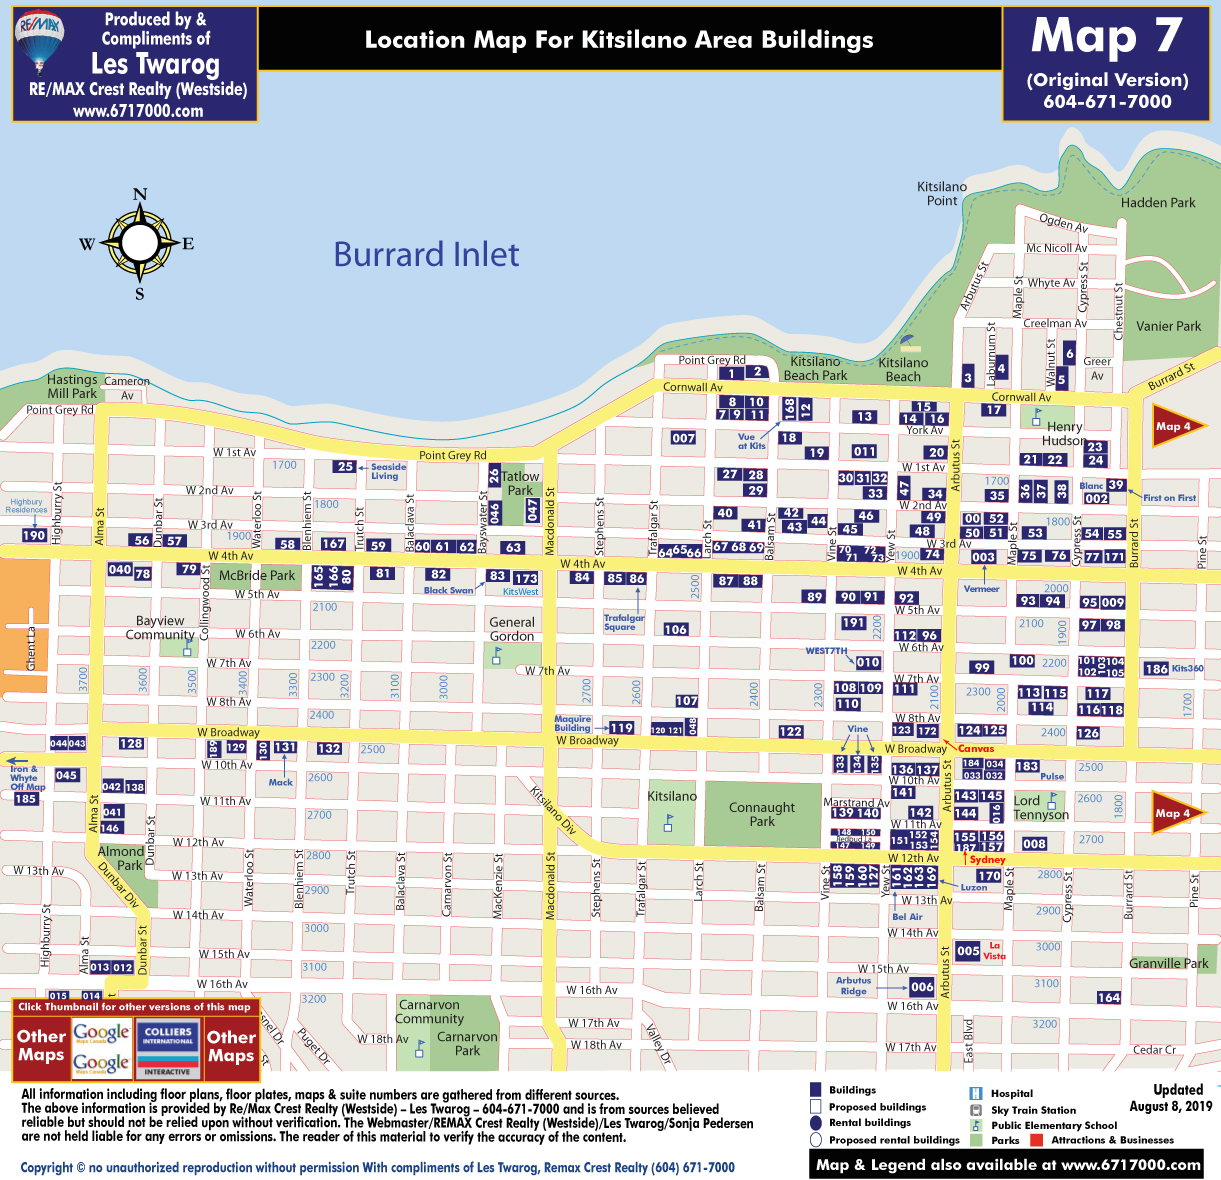 Detailed Interactive Downtown Vancouver Building Location Maps With